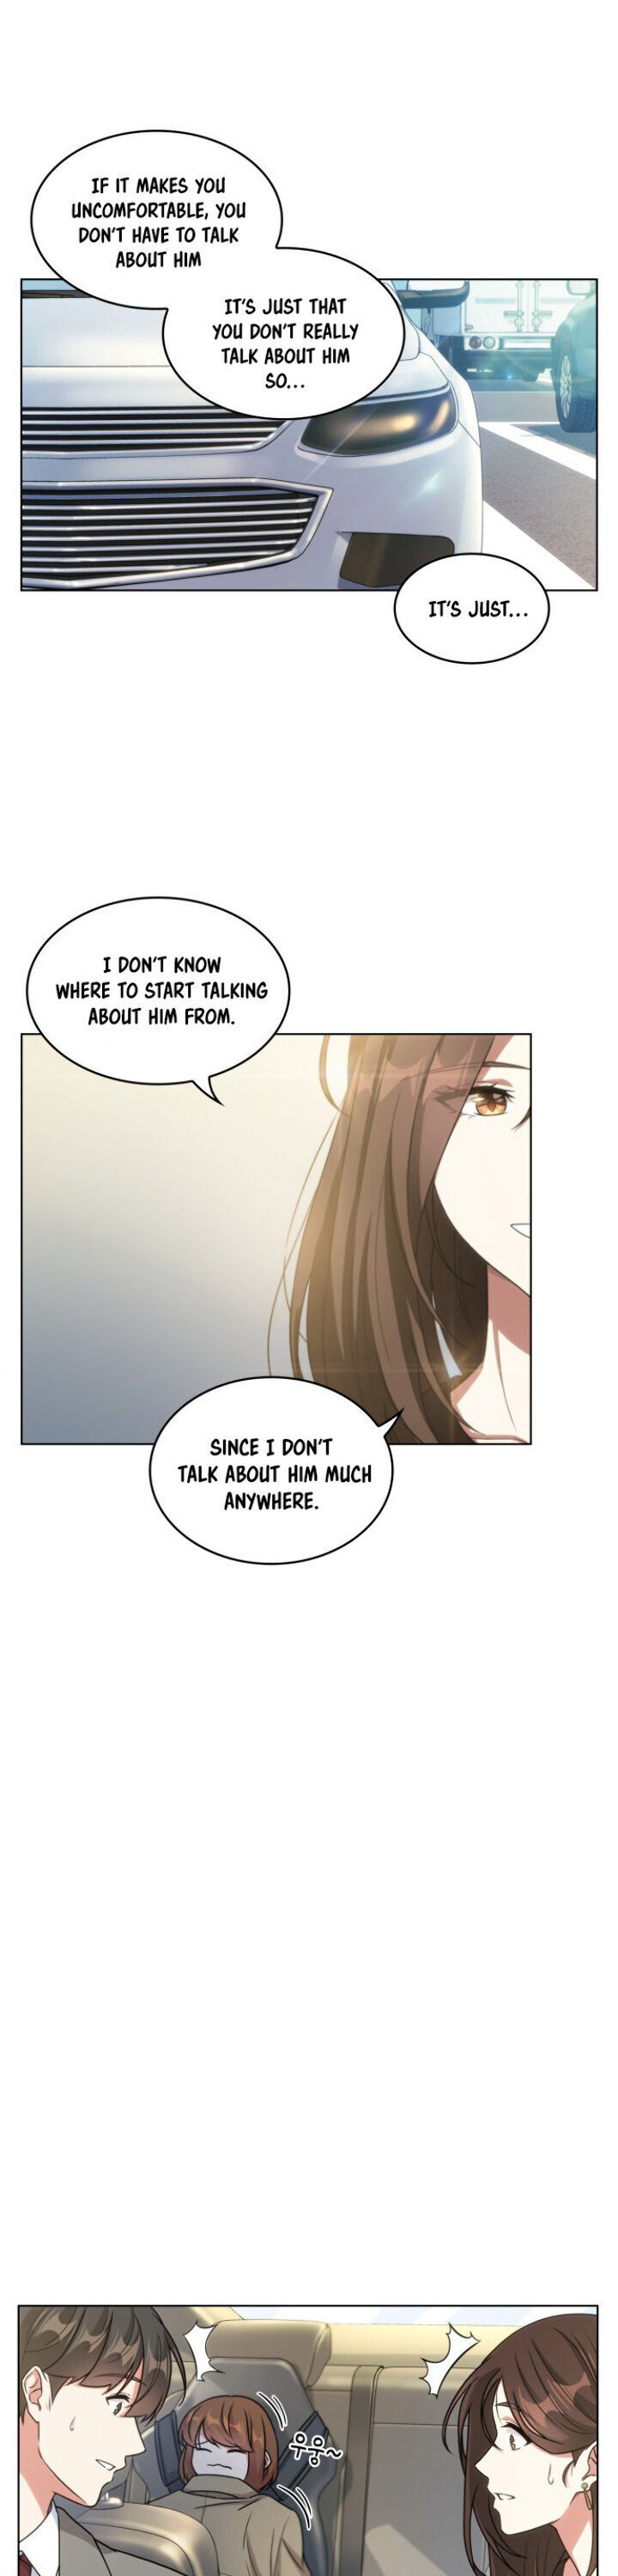 My Office Noona’s Story - Chapter 16 Page 16